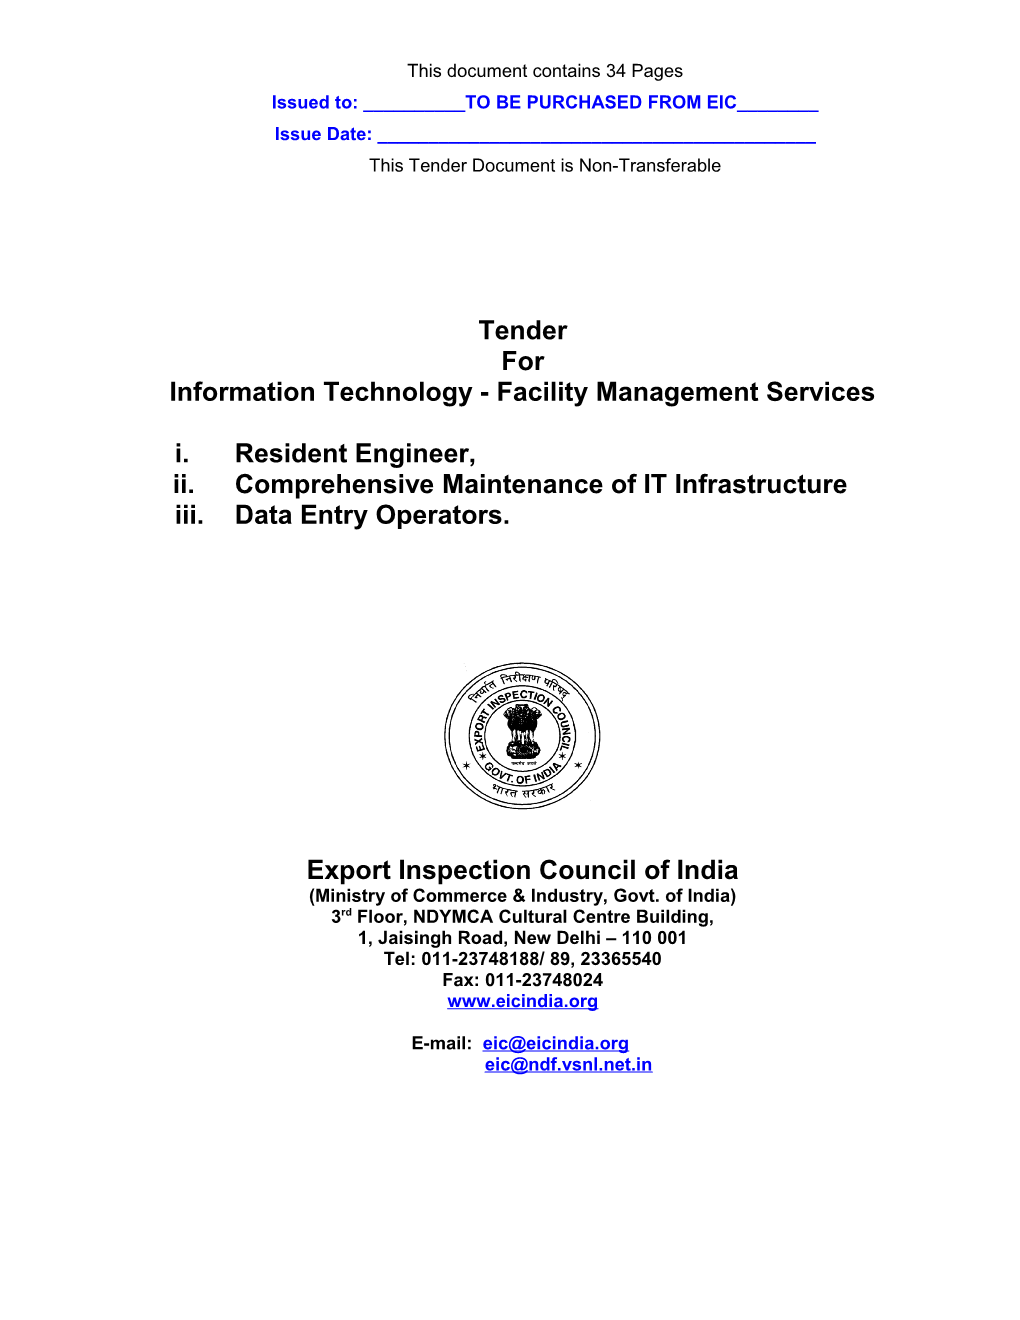 Information Technology - Facility Management Services